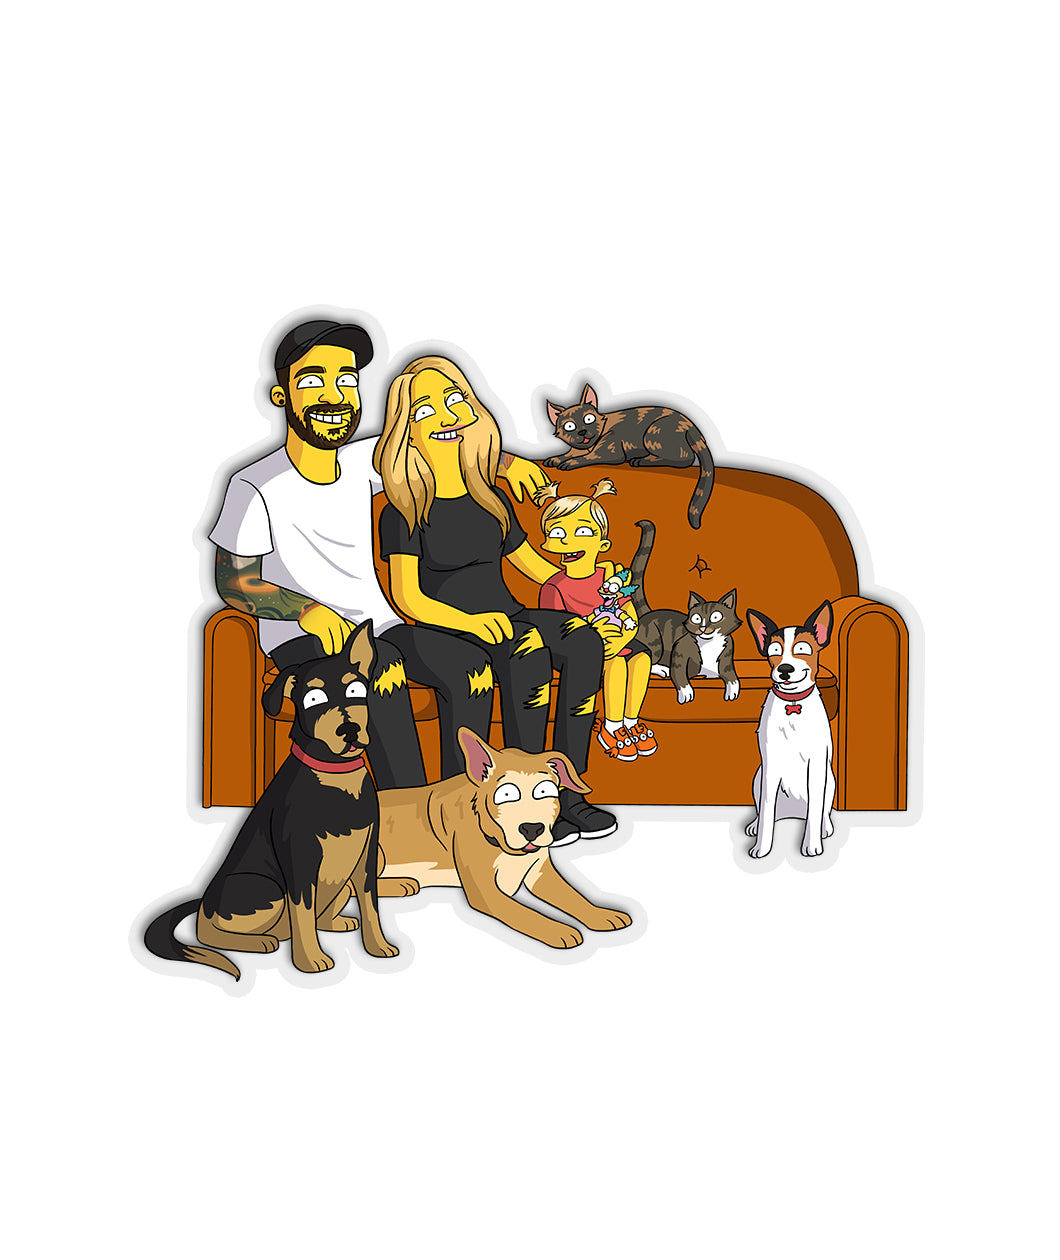 Sticker featuring two adults, 1 child, 3 dogs, and 2 cats sitting on and around a brown couch drawn in the style of The Simpsons - by Charles Trippy